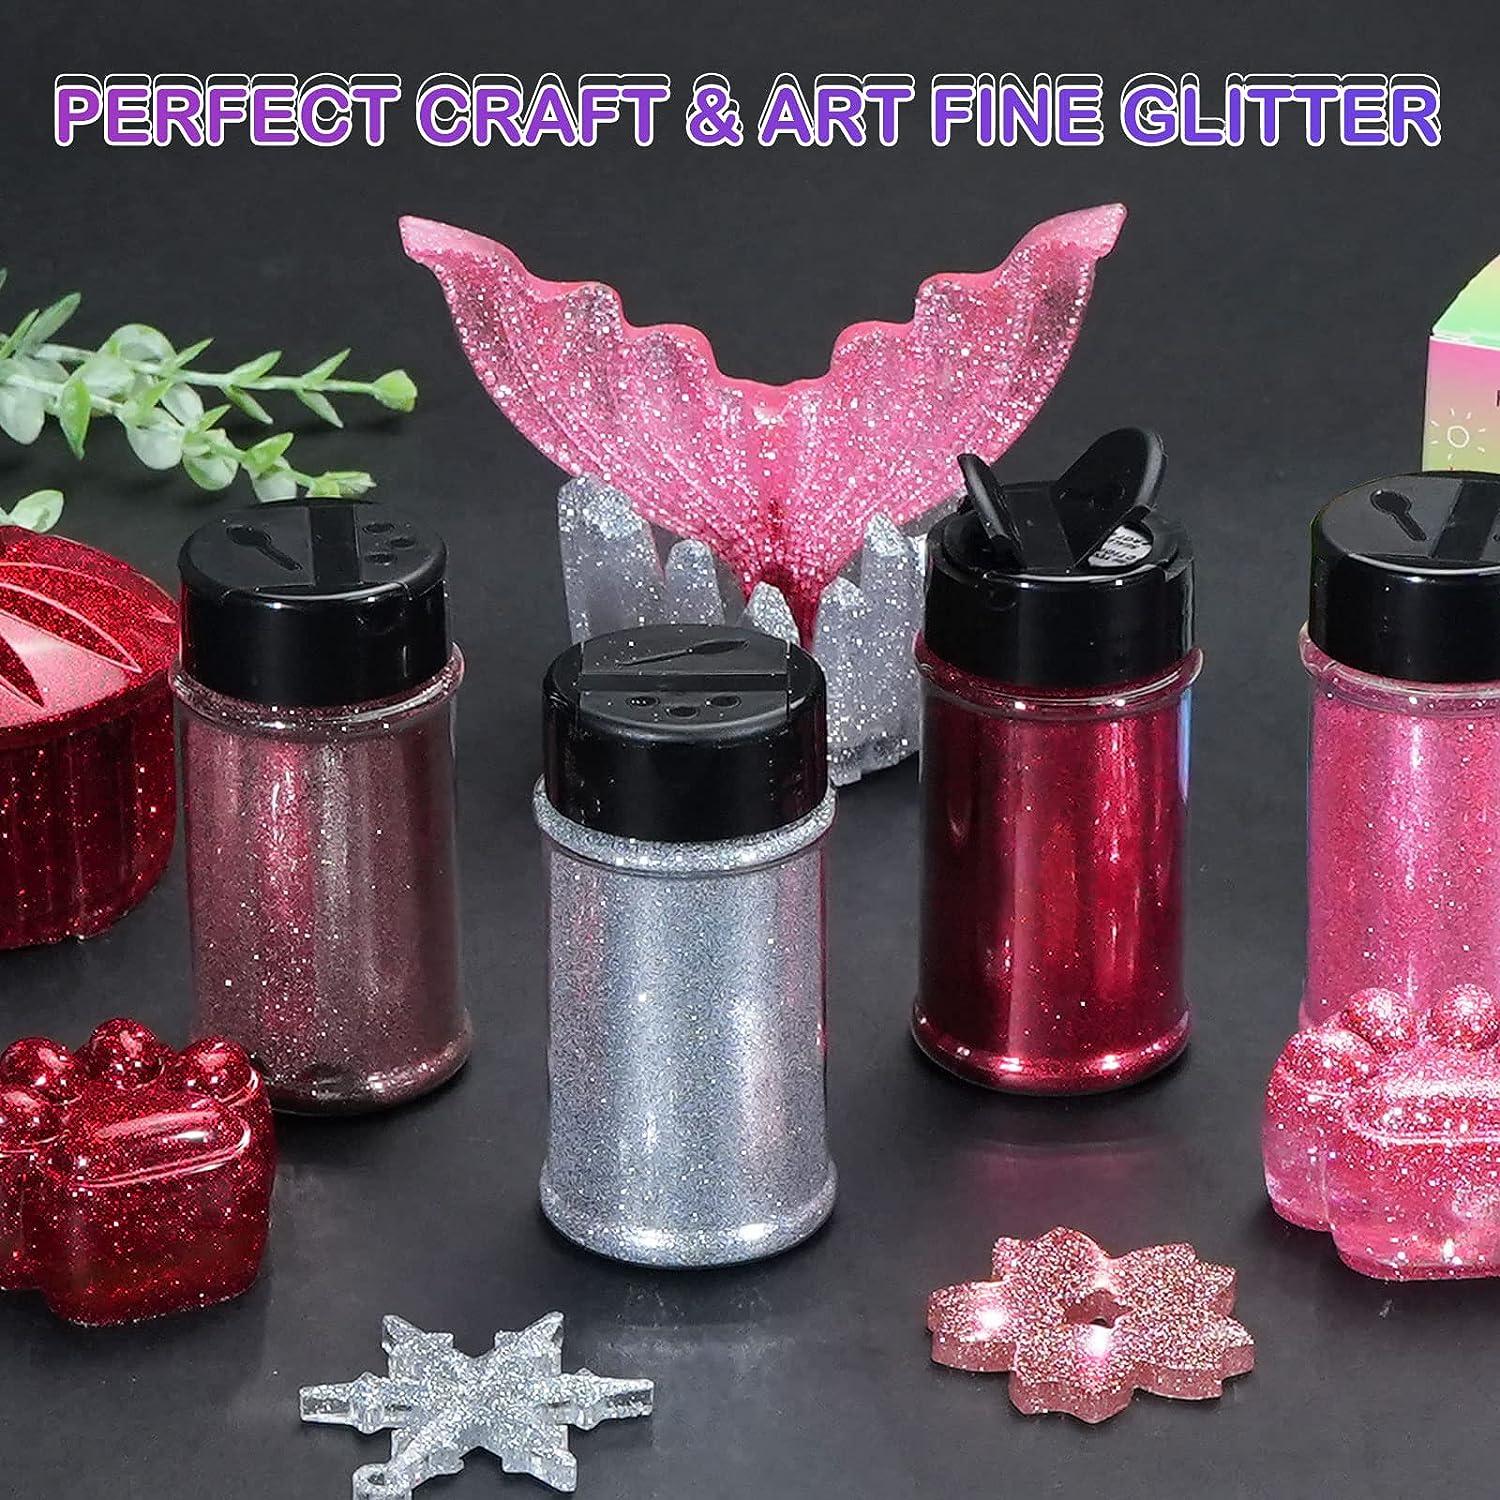 HTVRONT Silver Fine Glitter for Crafts - 50g/1.76oz Extra Fine Glitter for  Resin, Portable Ultra Fine Glitter for Nails, Tumblers, Ornaments, Makeup,  Body, Cosmetic, Candle, Slime Glitter Shaker Jar silver 50g